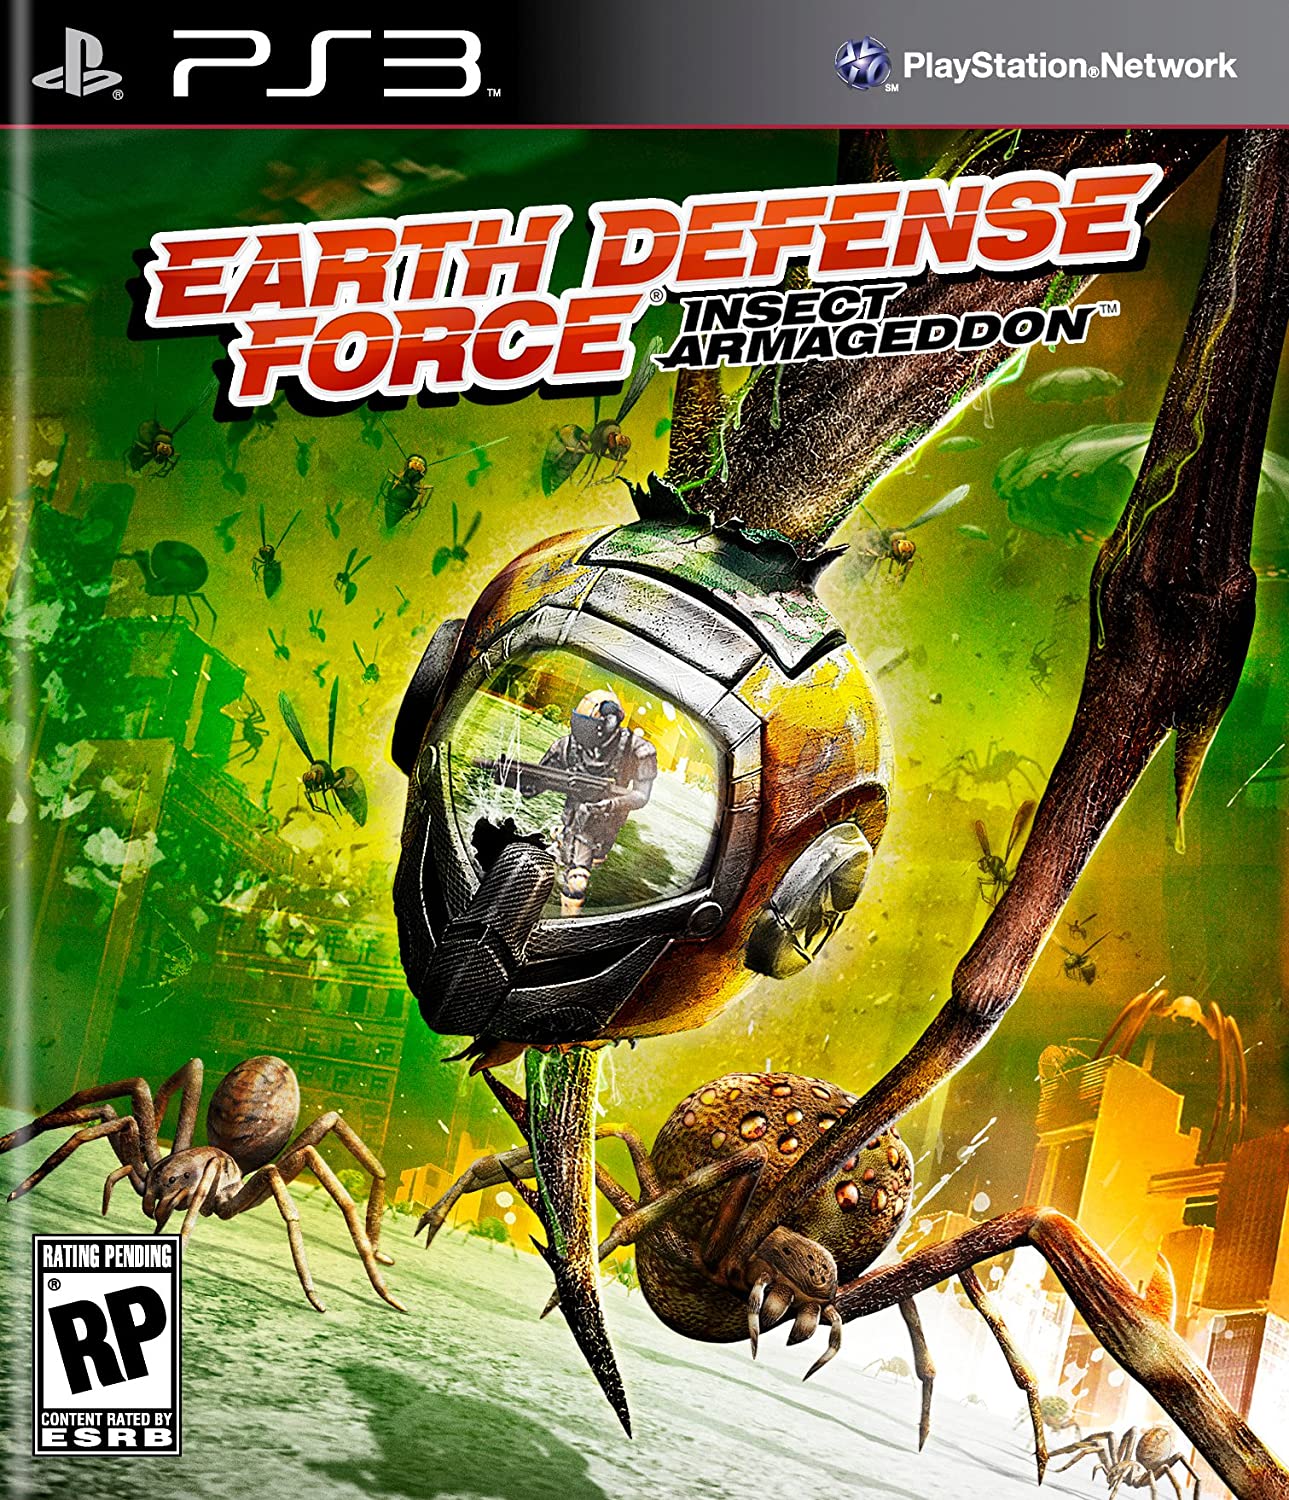 The Earth Defense Force: Insect Armageddon - Darkside Records